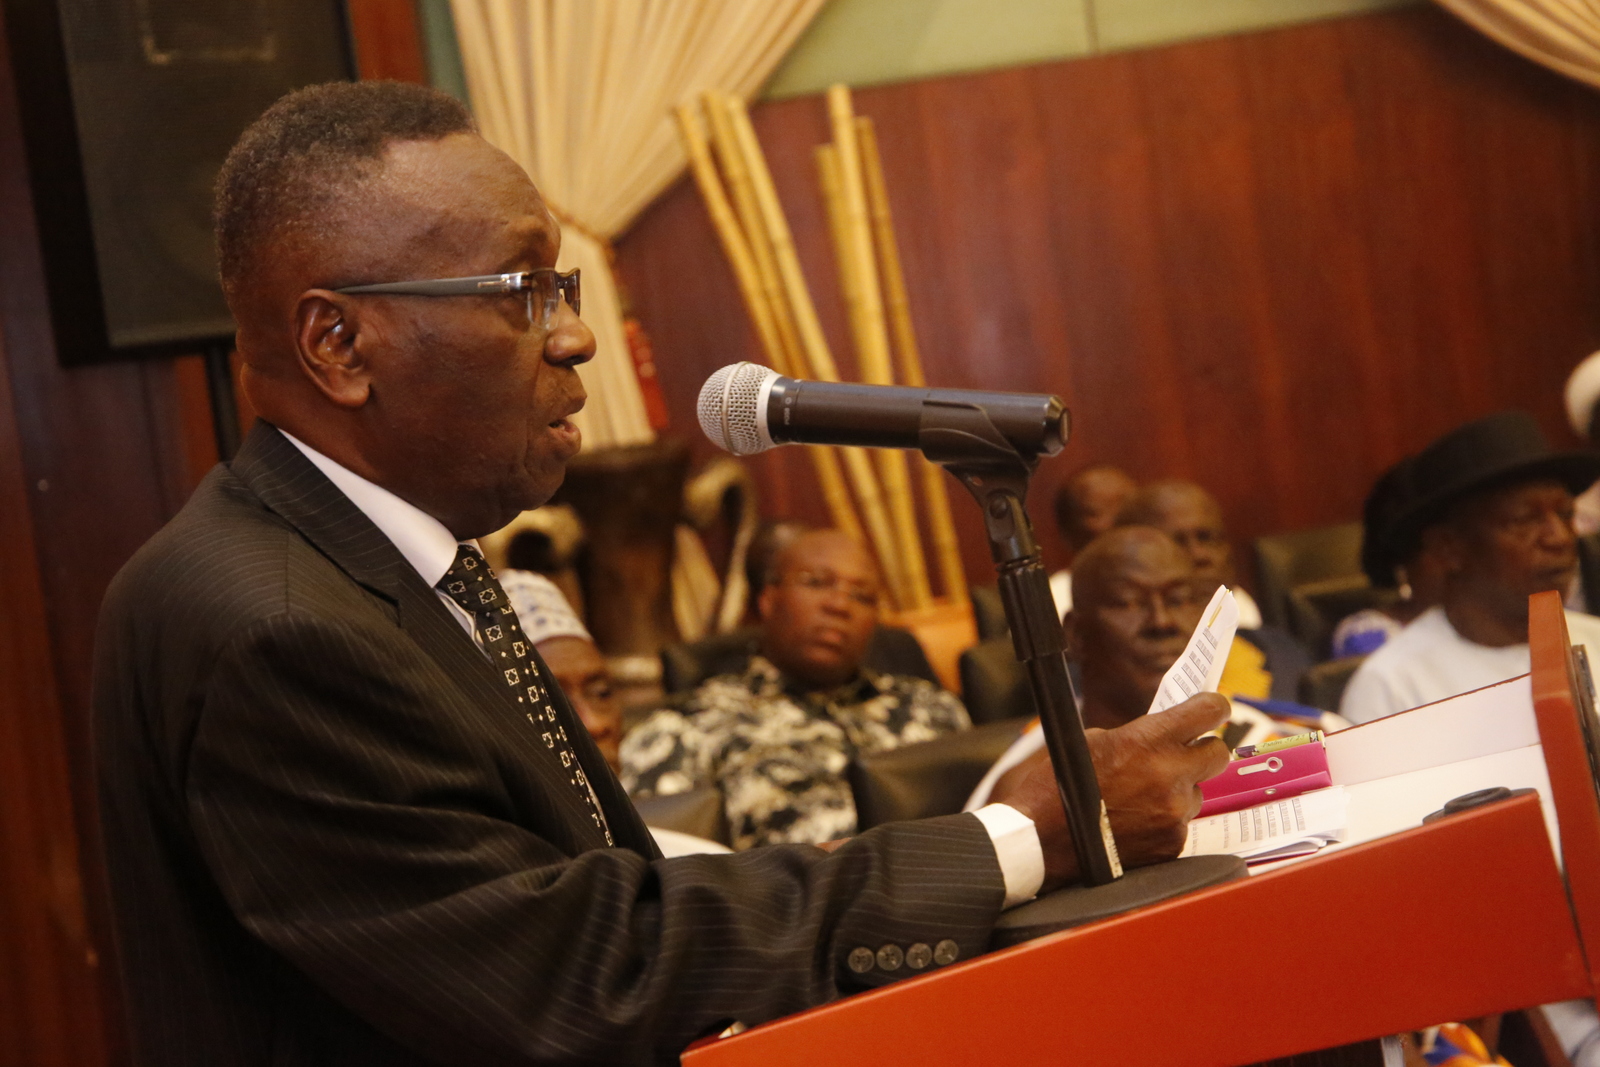 Mr. Justice S.A. Brobbey, Chairperson of the Commission of Inquiry